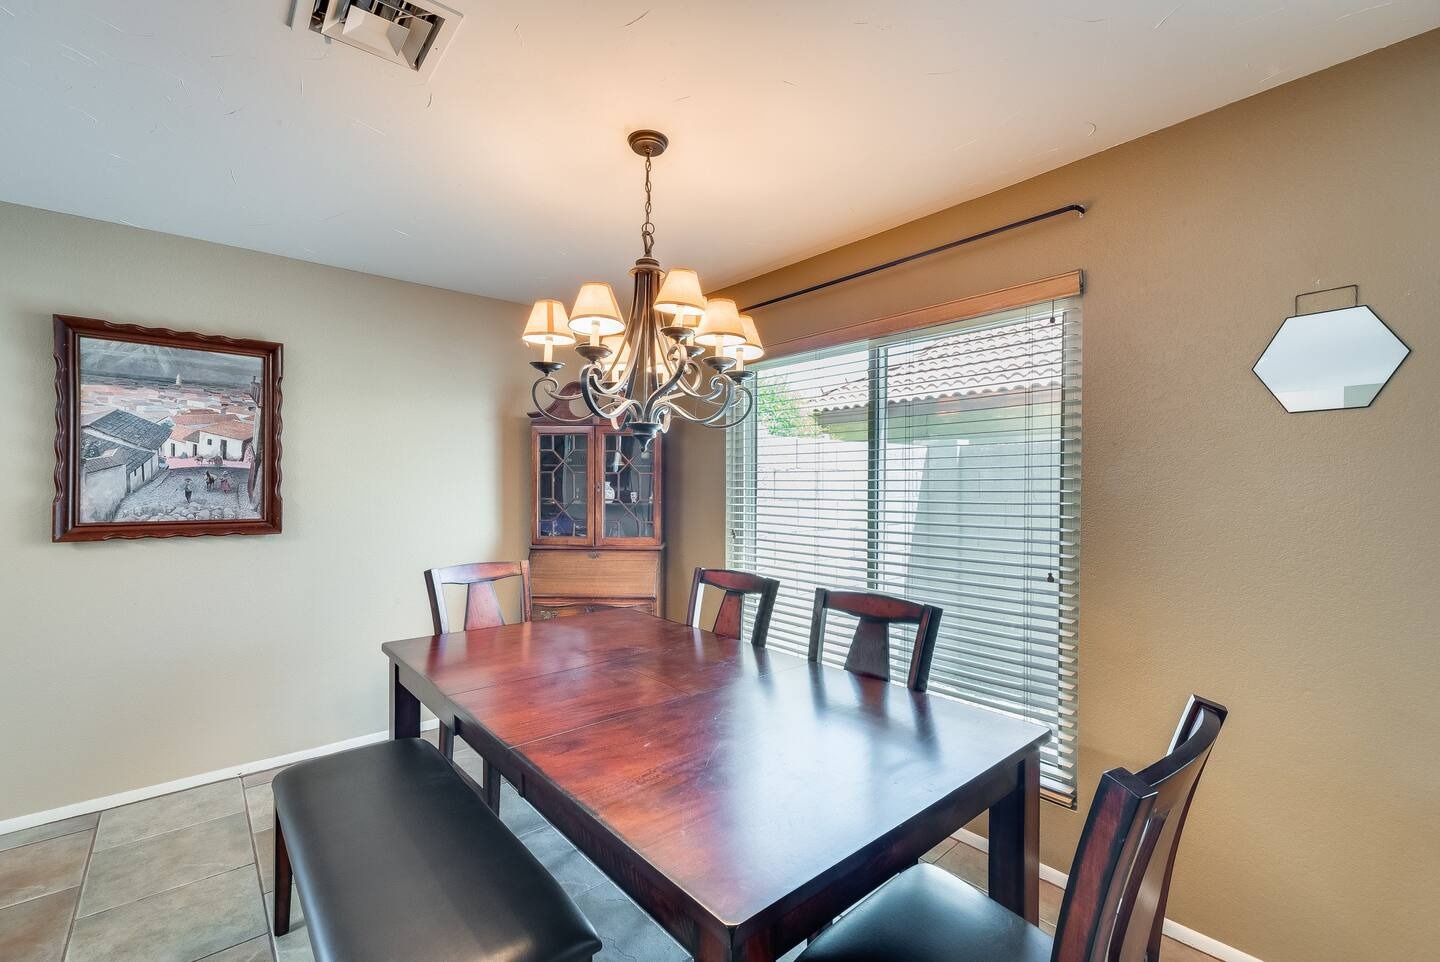 Glendale Vacation Rentals, Cahill Casa - Imagine dining and enjoying your vacation around this sturdy wooden dining table